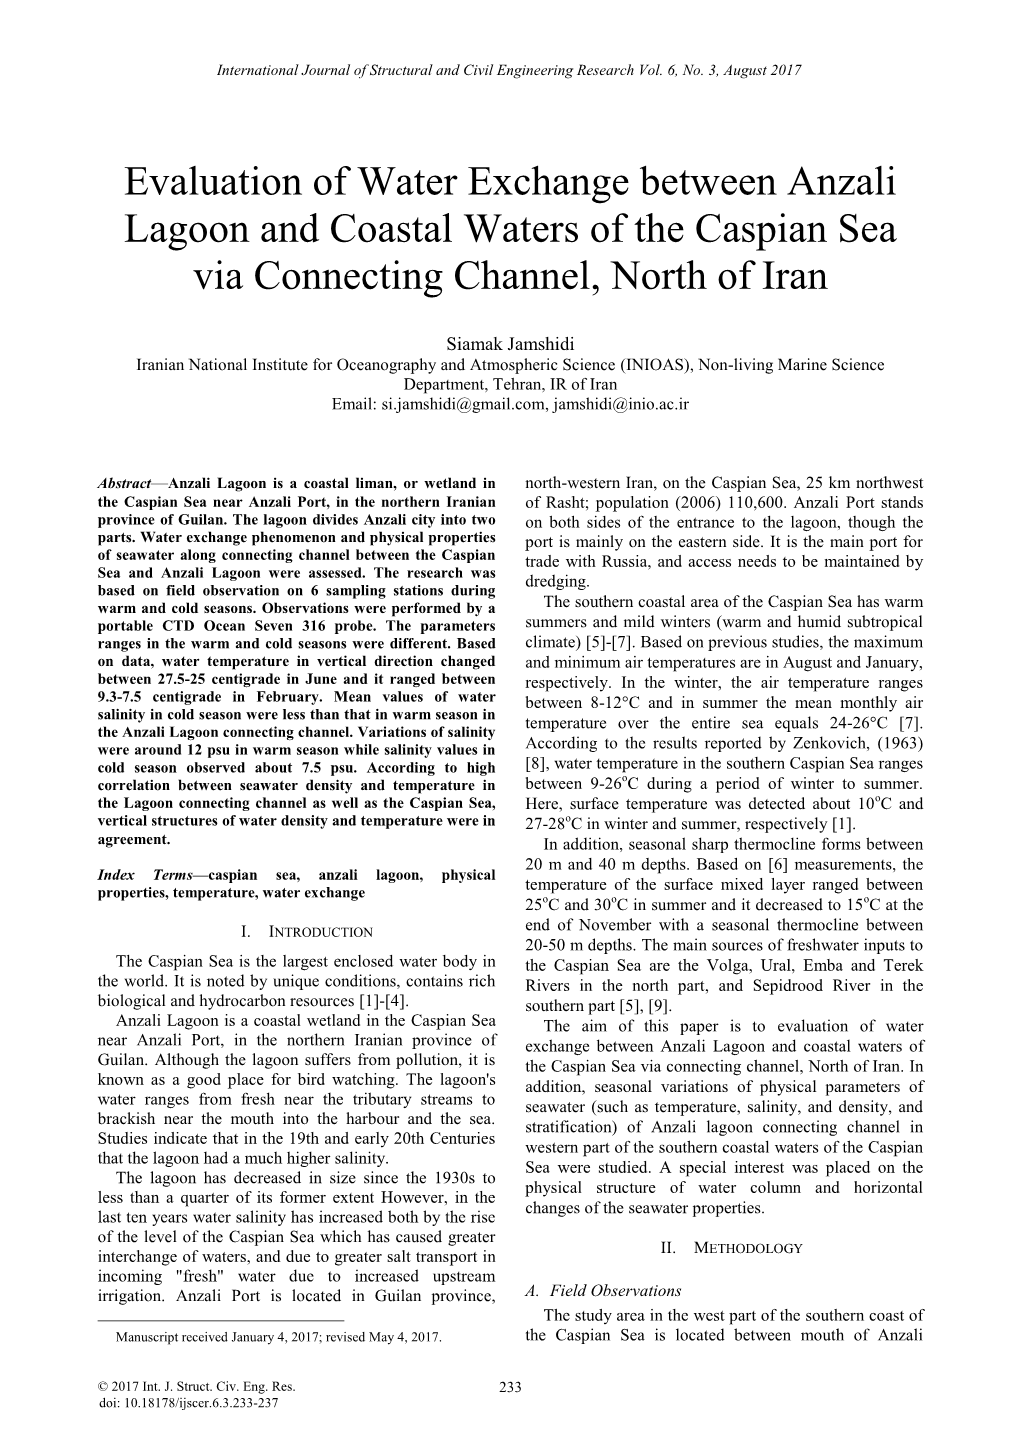 Evaluation of Water Exchange Between Anzali Lagoon and Coastal Waters of the Caspian Sea Via Connecting Channel, North of Iran